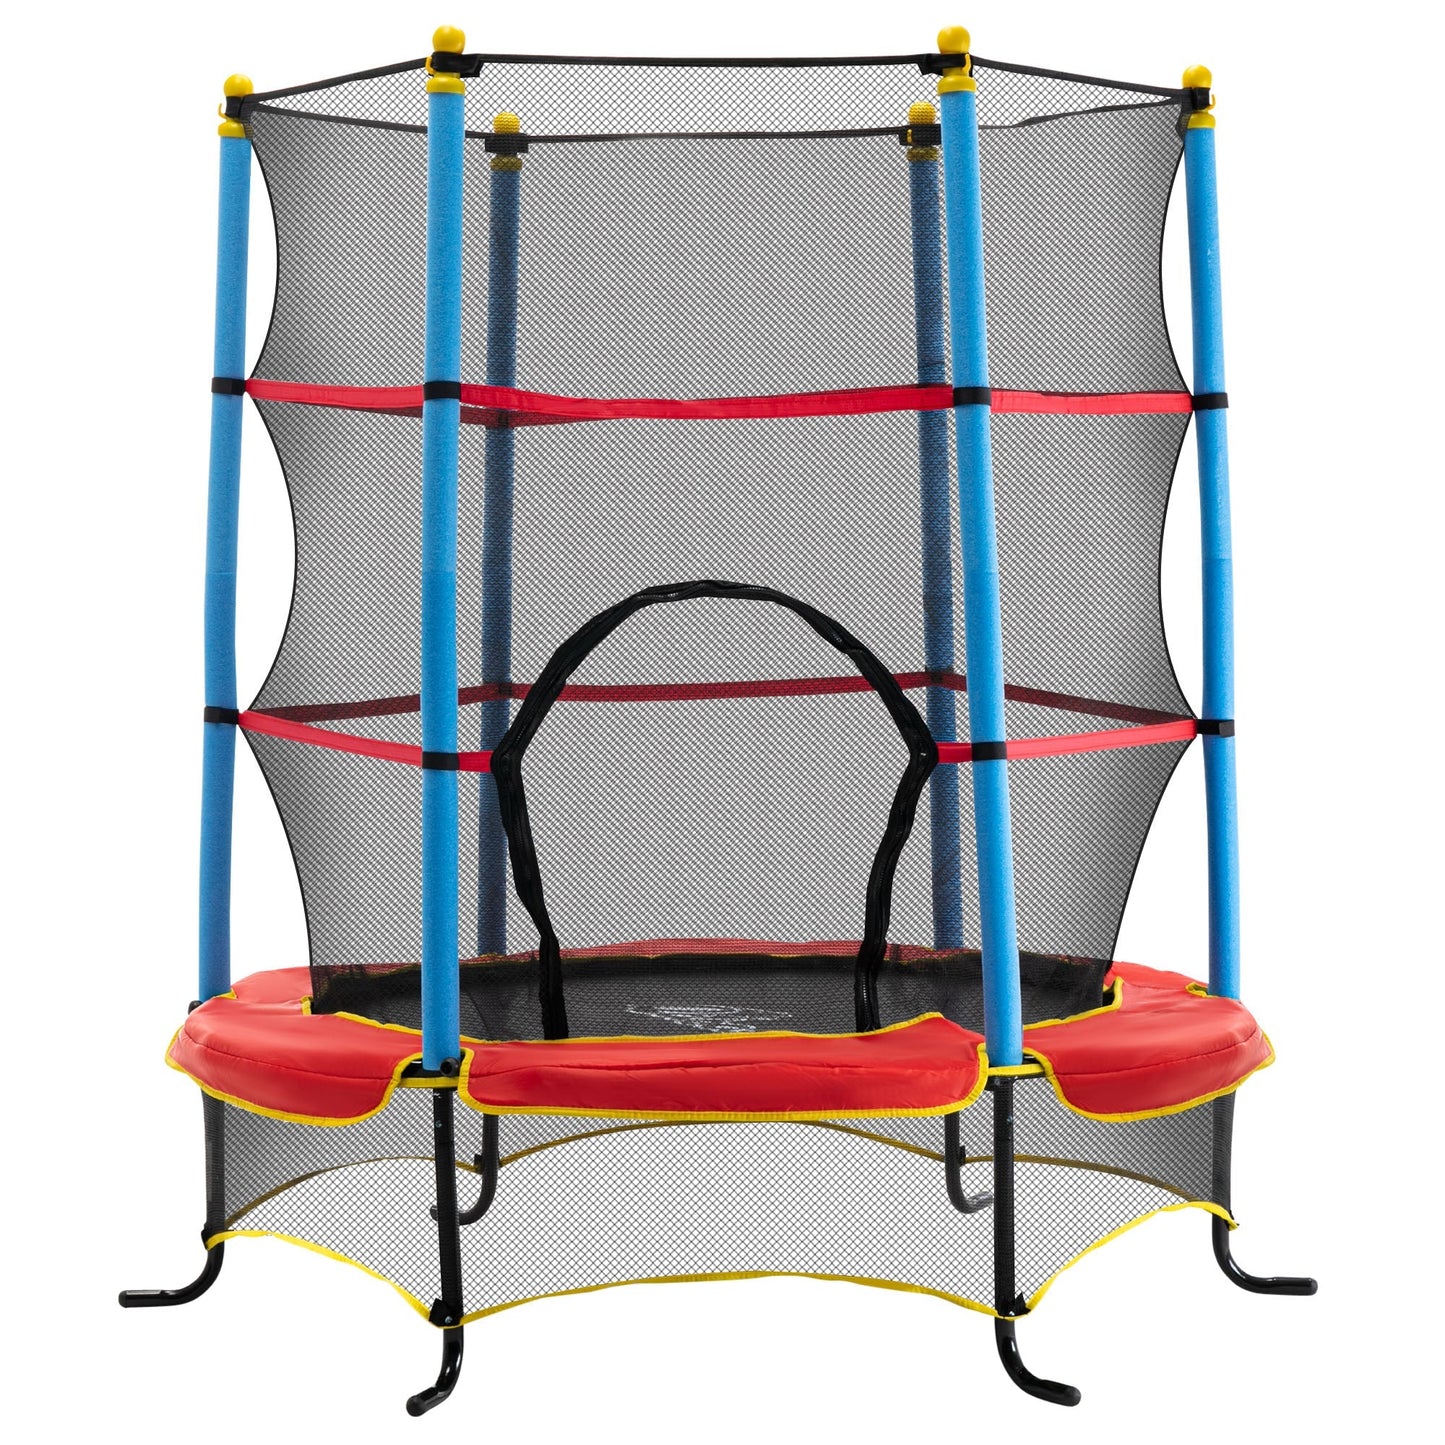 Kids Trampoline with Safety Enclosure Net and Built-in Zipper Safety Pad, Indoor Outdoor Exercise Fitness Equipment for Children Toddler Age 3-6 Years Old at Gallery Canada